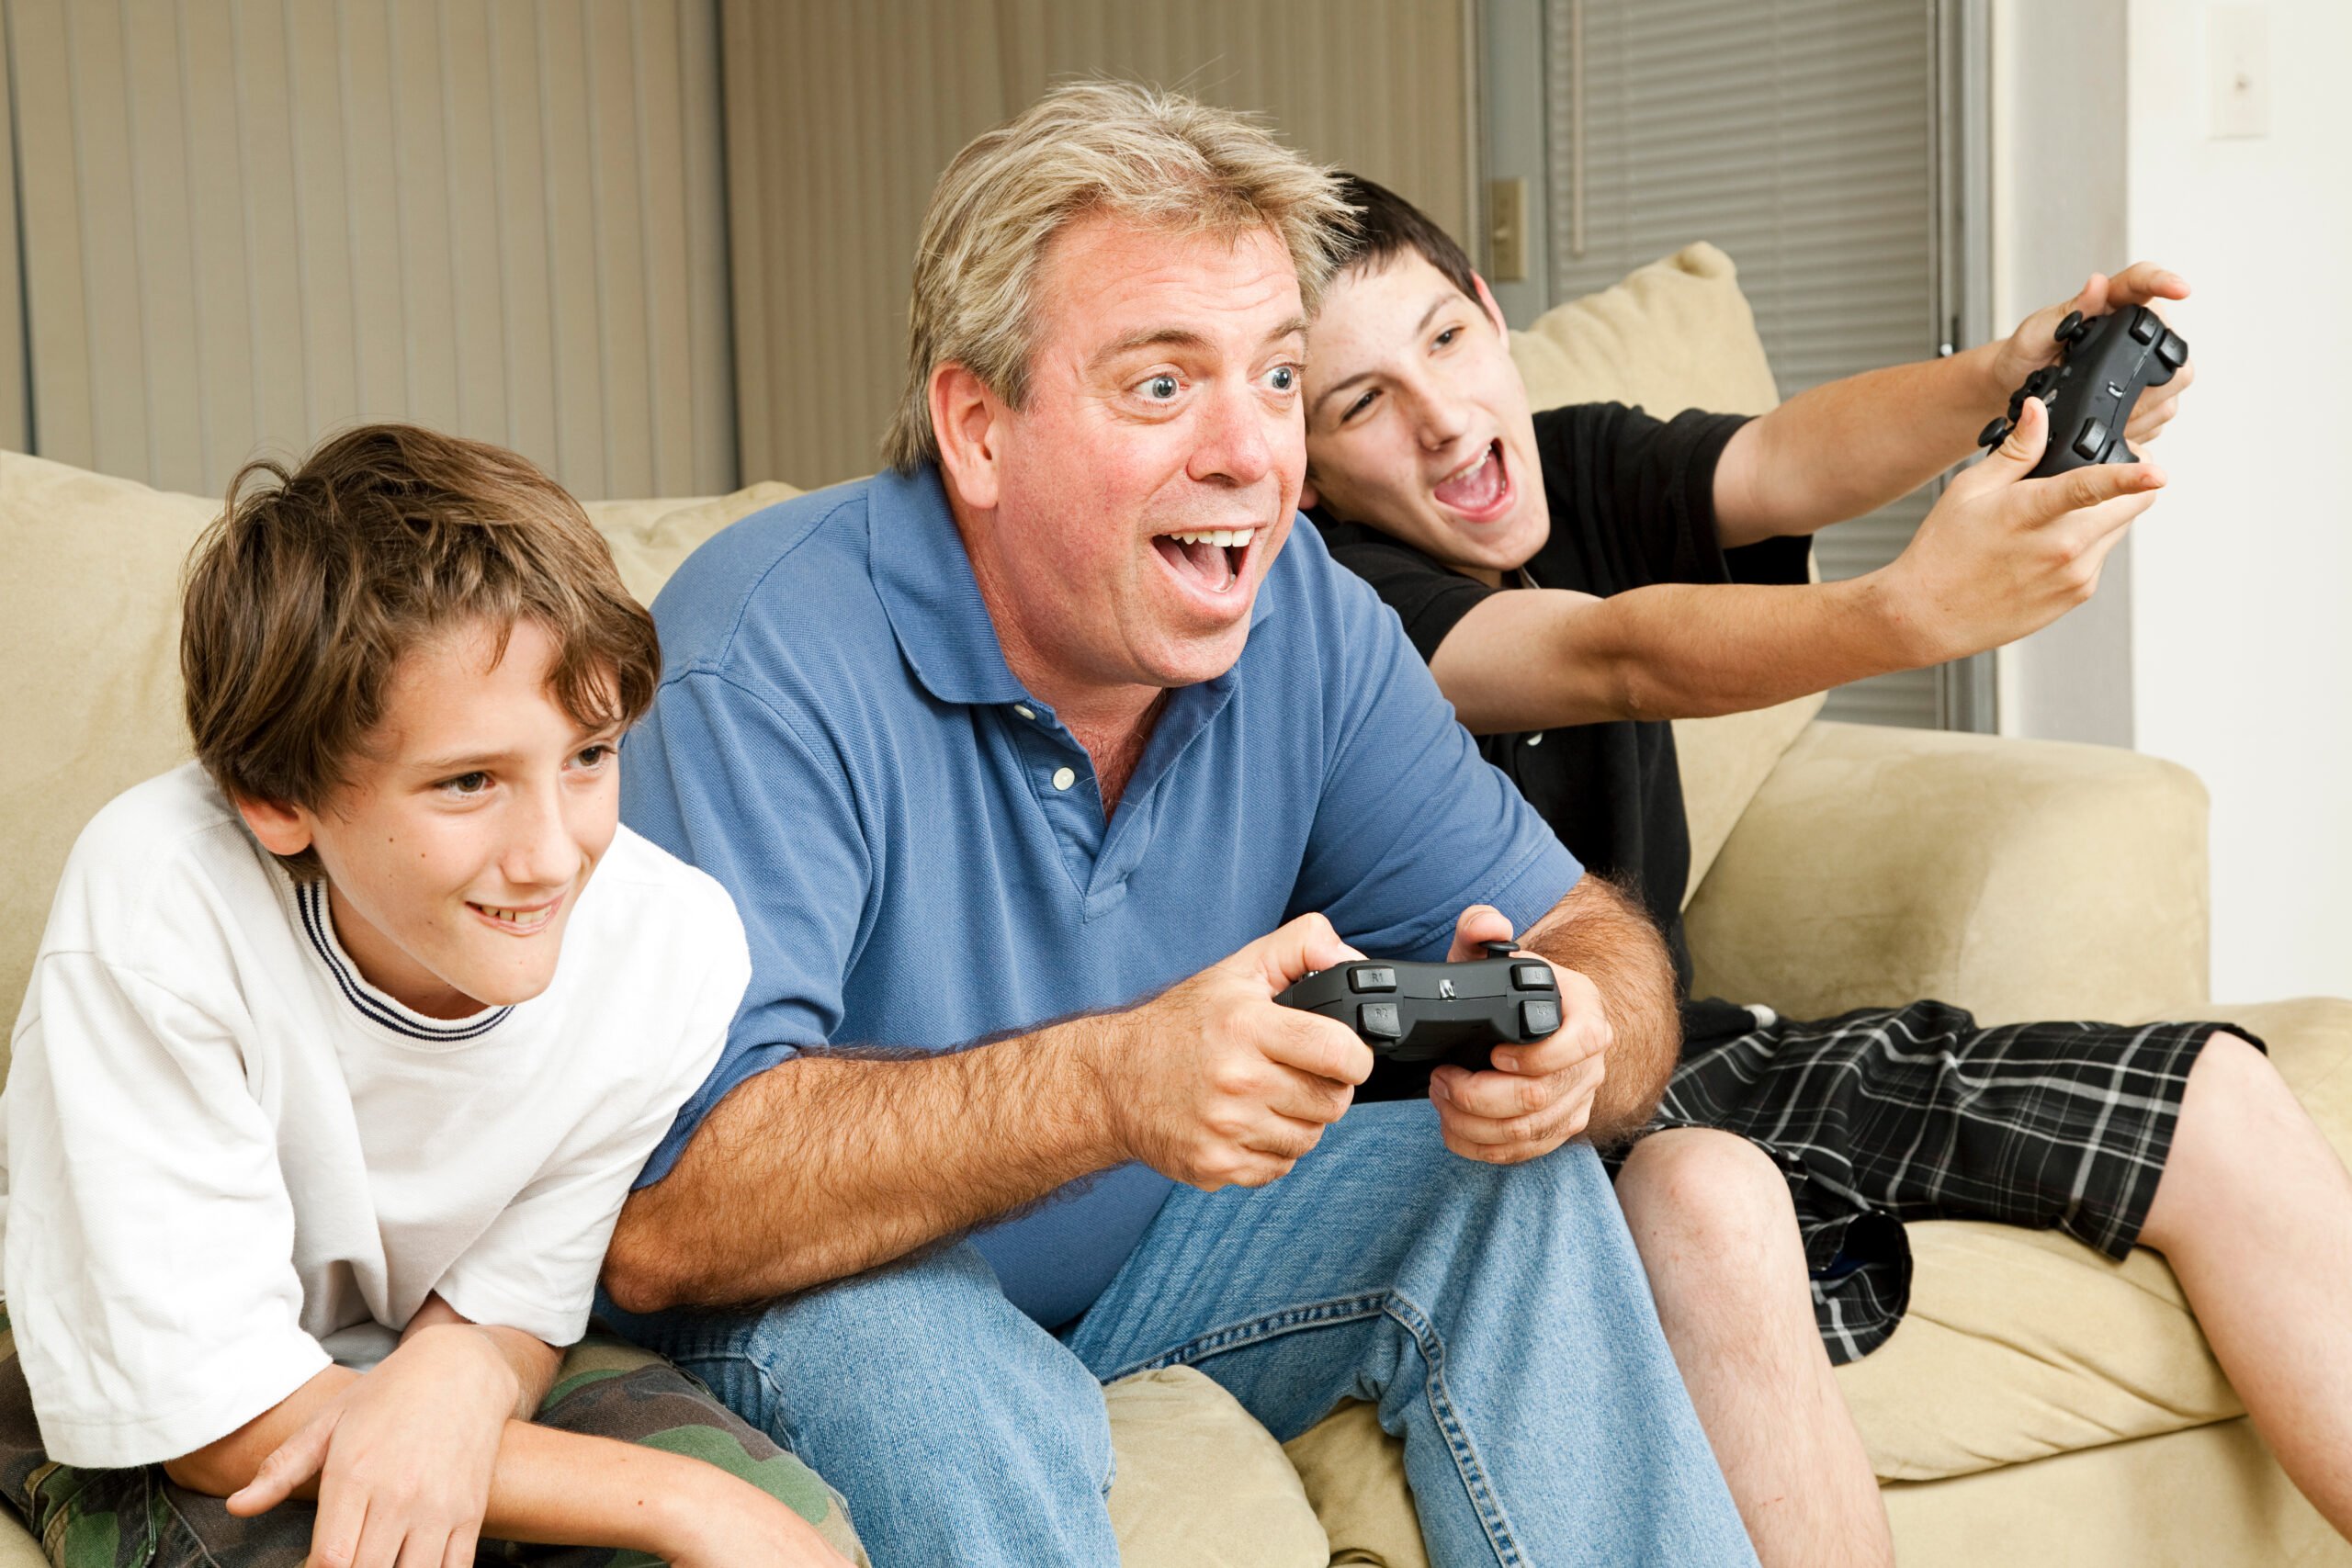 Uncle playing video games with kids on couch